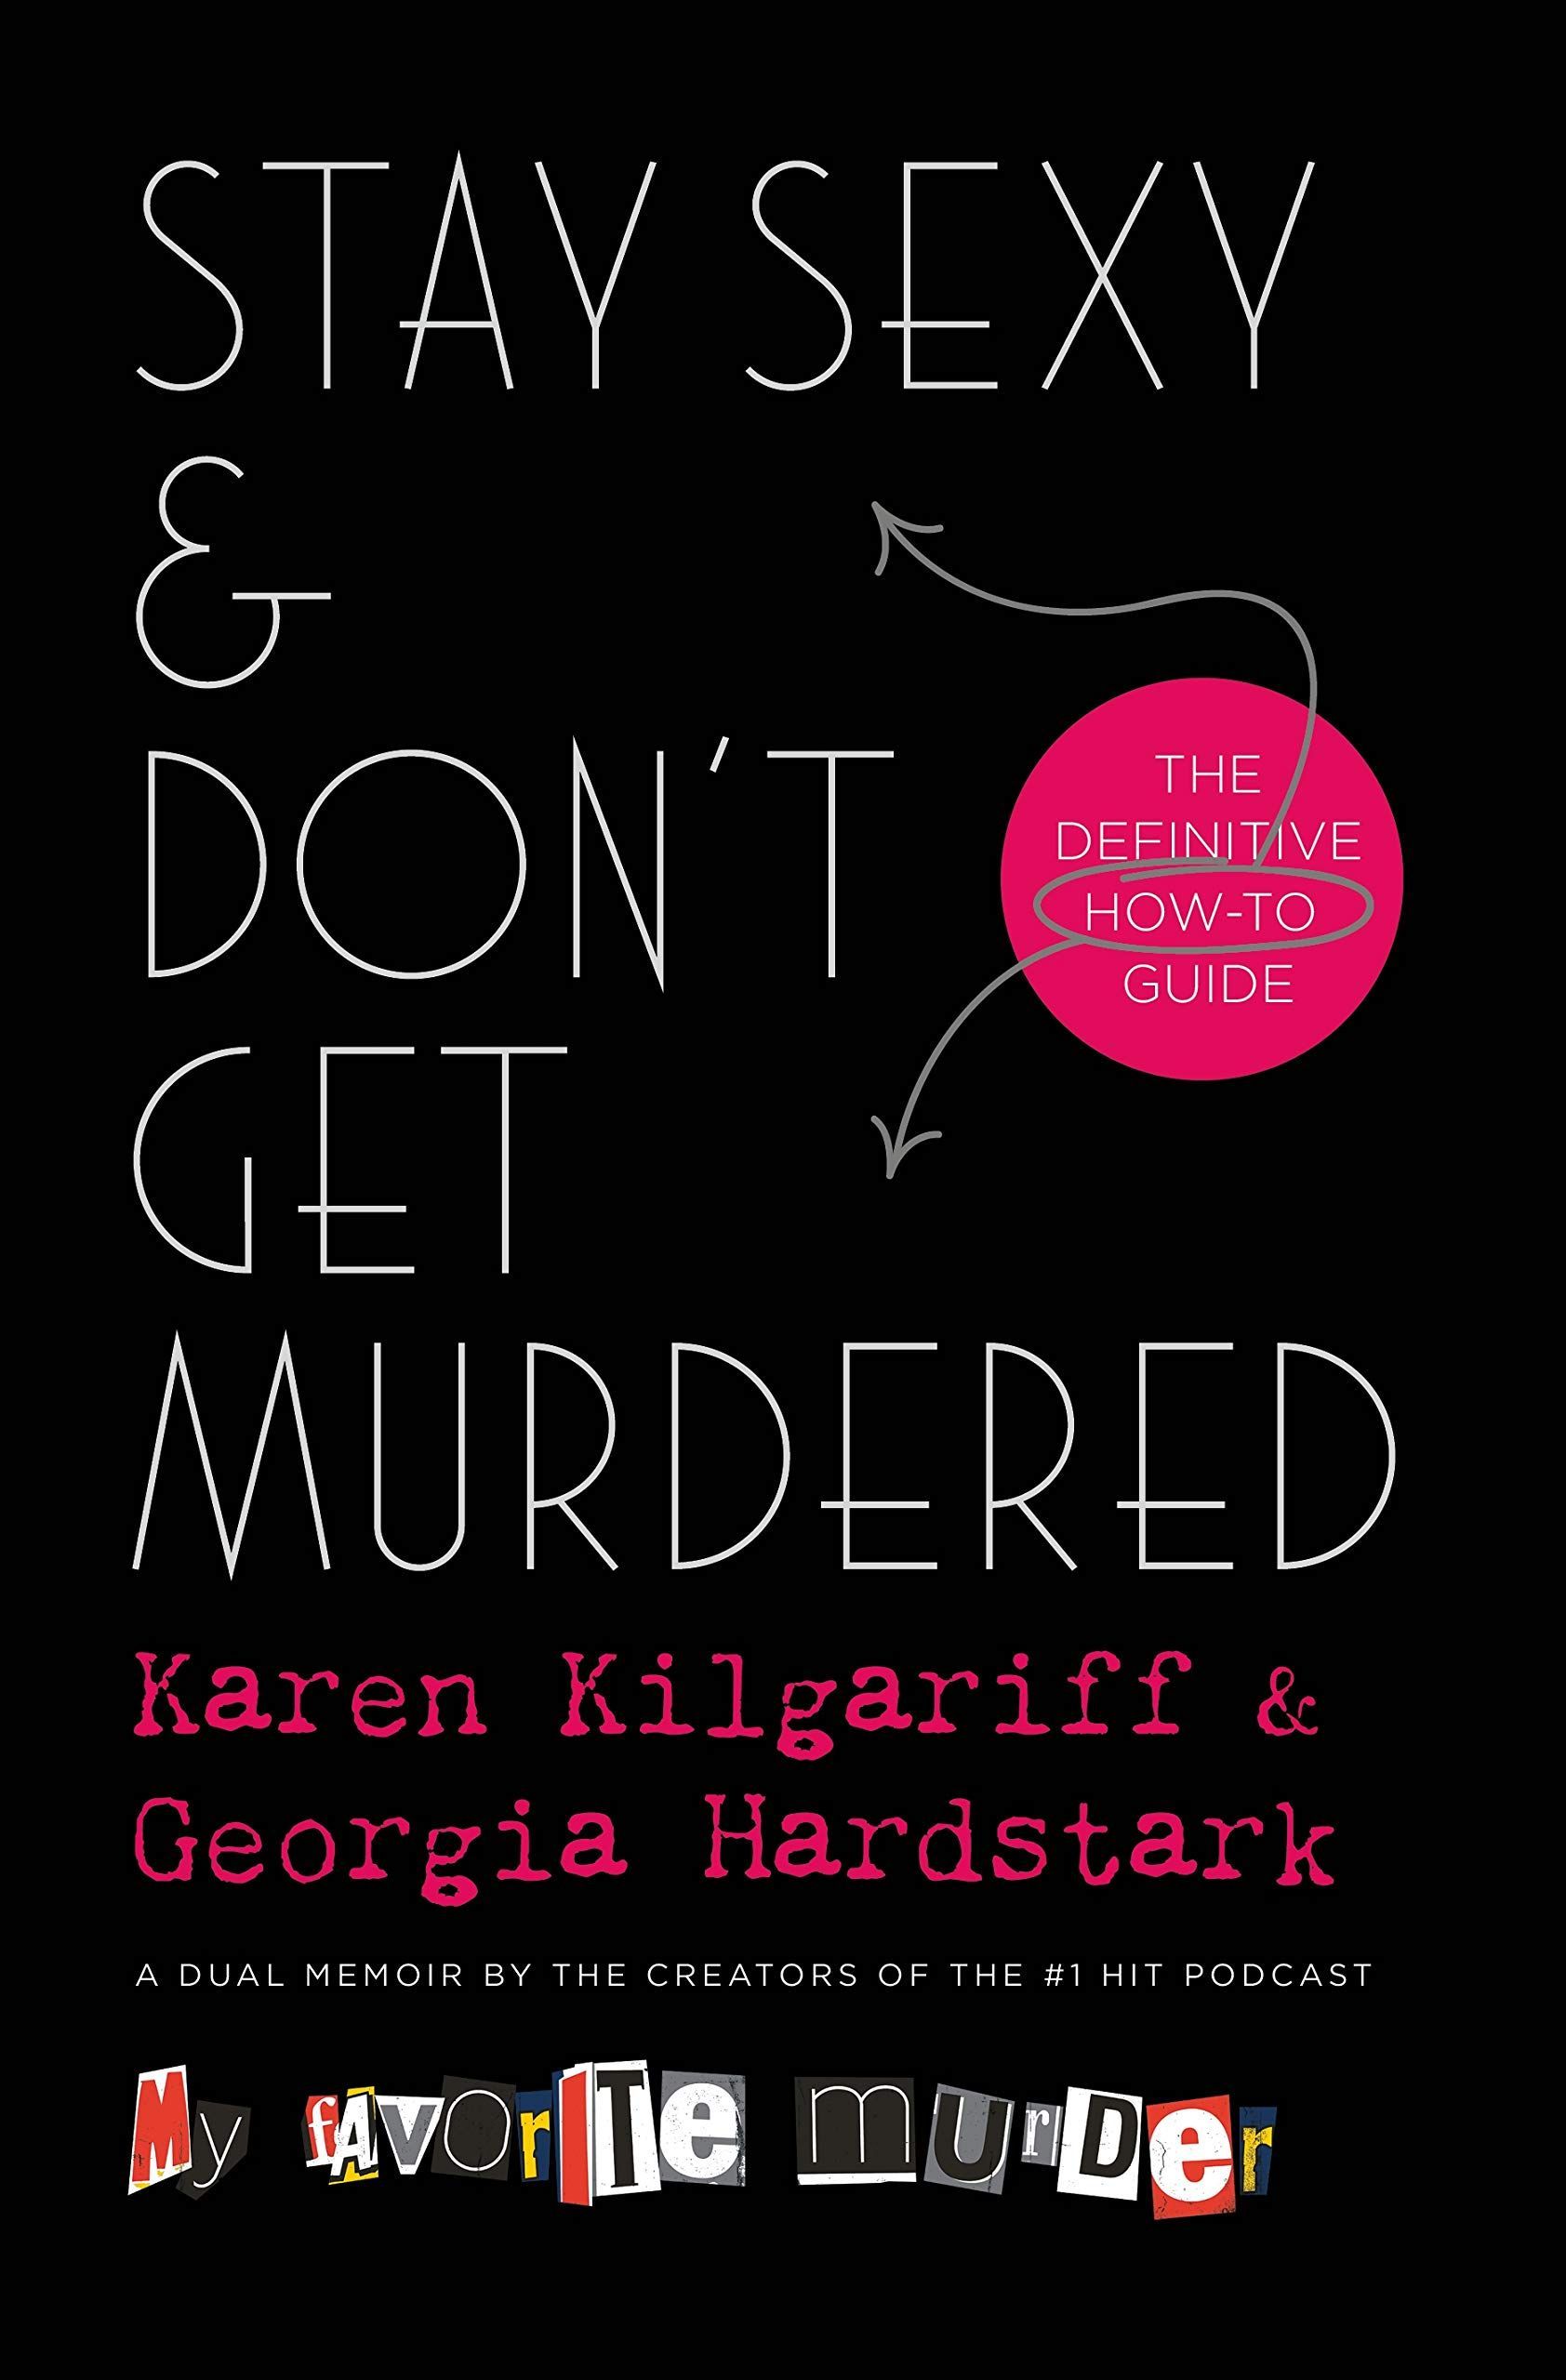 Stay Out of the Forest: On Karen Kilgariff and Georgia Hardstark’s “Stay Sexy & Don’t Get Murdered”